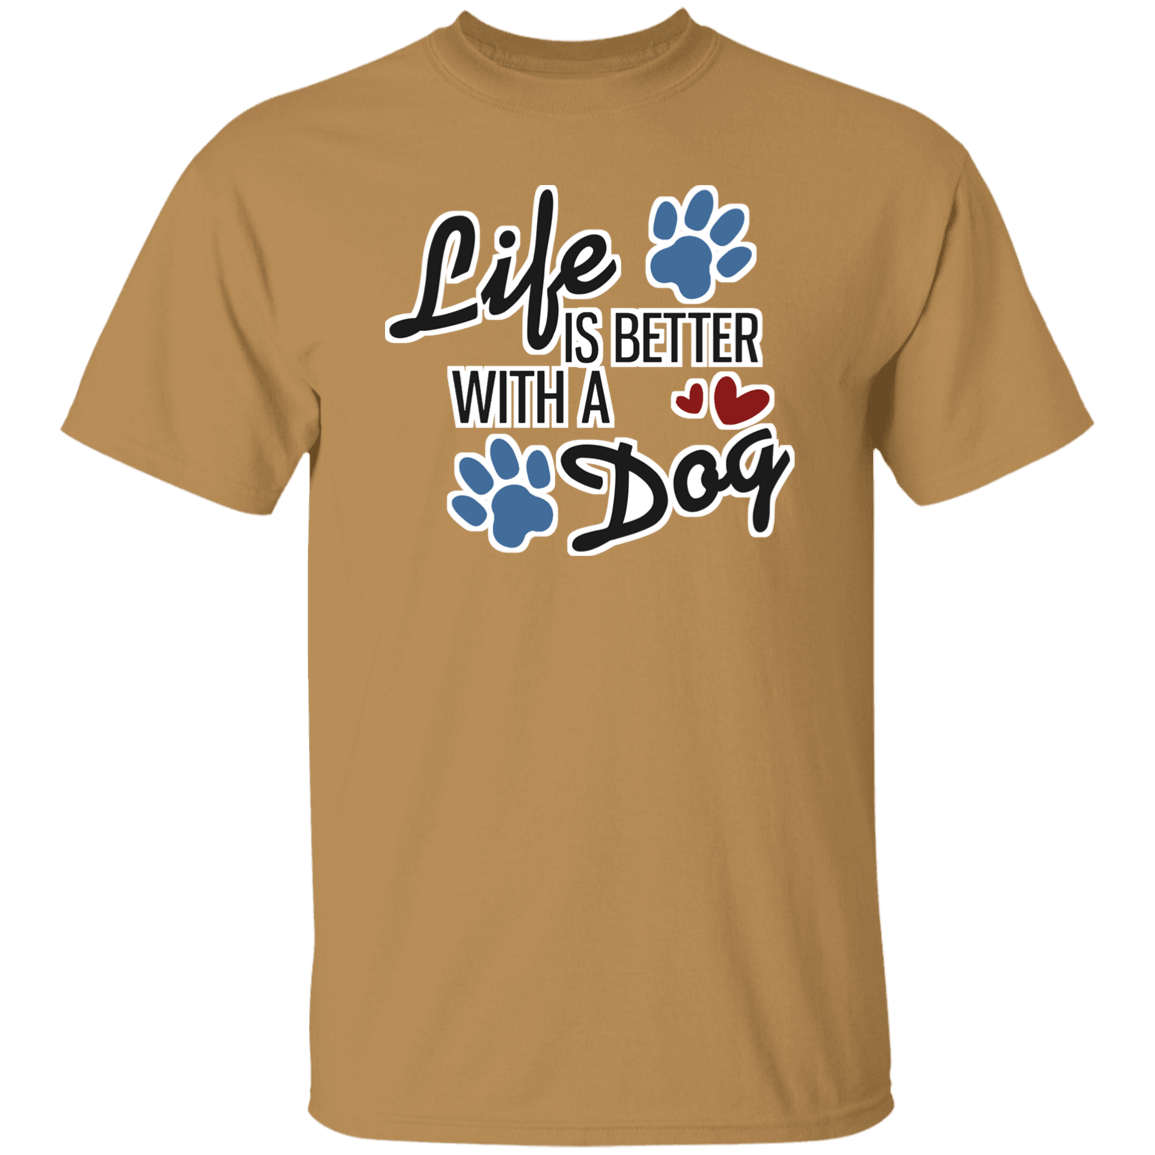 Life is better with a dog - T-Shirt.